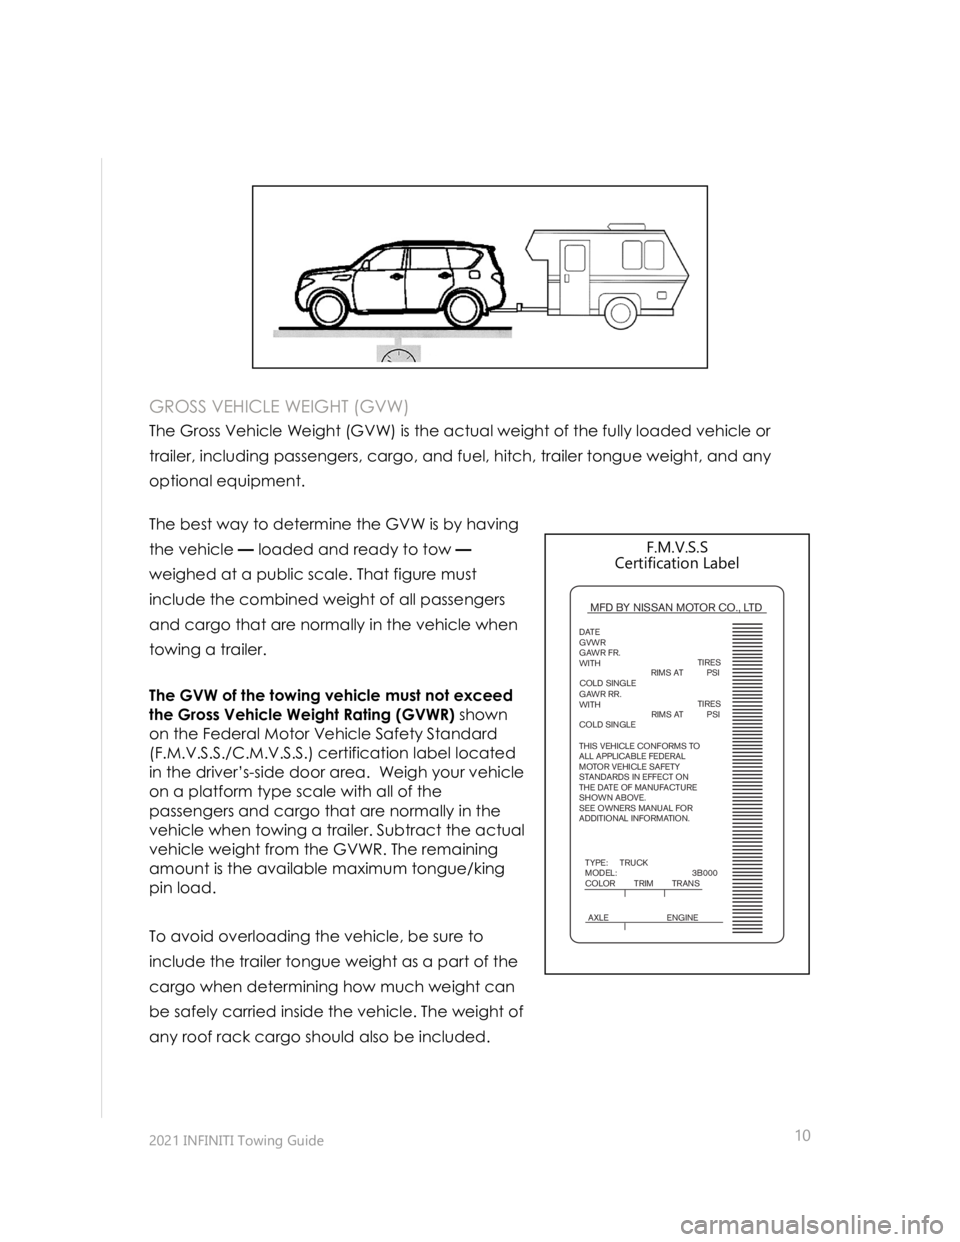 INFINITI QX80 2021  Towing Guide  
 
 
 
 
2021 INFINITI Towing Guide  
 
 
10
 
 
 
 
 
 
 
 
 
 
GROSS VEHICLE WEIGHT (GVW) 
The Gross Vehicle Weight (GVW) is the actual weight of the fully loaded vehicle or 
trailer, including pas